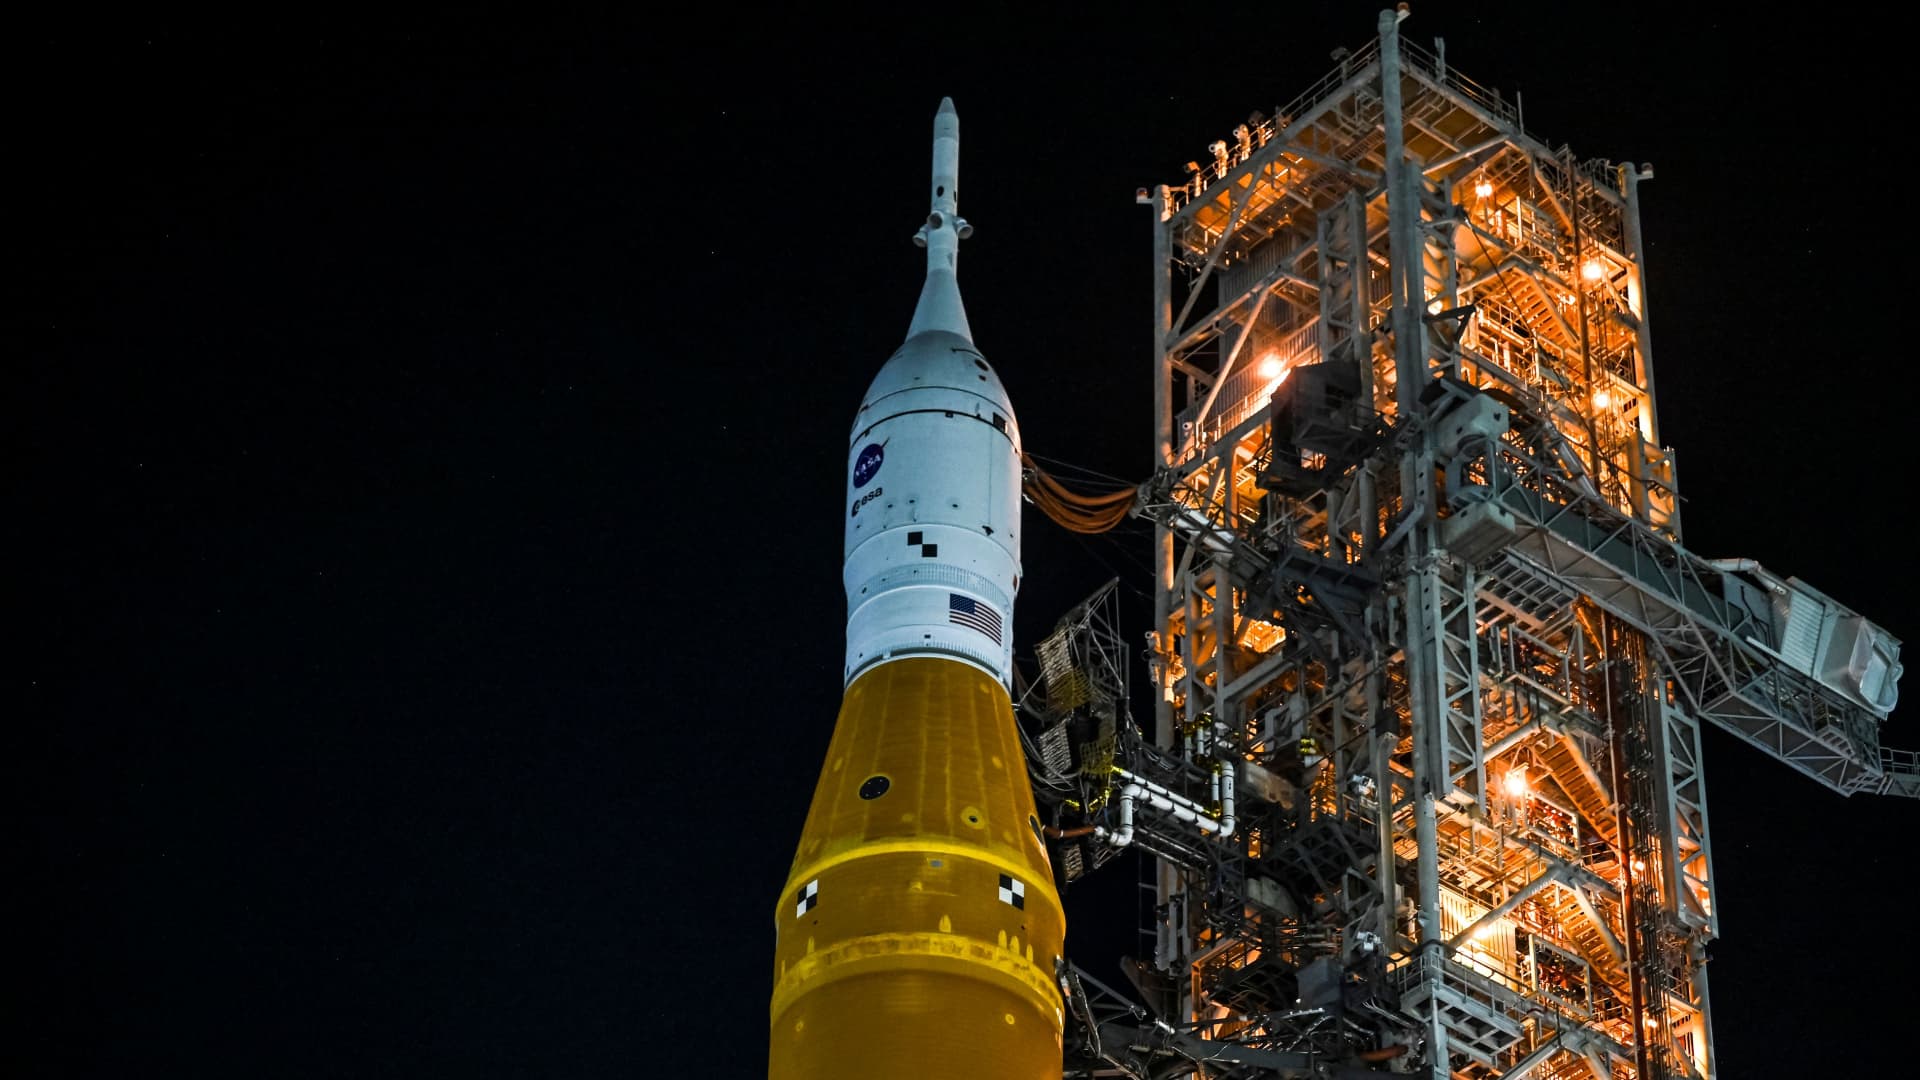 nasa-is-set-to-launch-the-artemis-1-mission-on-its-most-powerful-rocket-yet-here-s-what-you-should-know